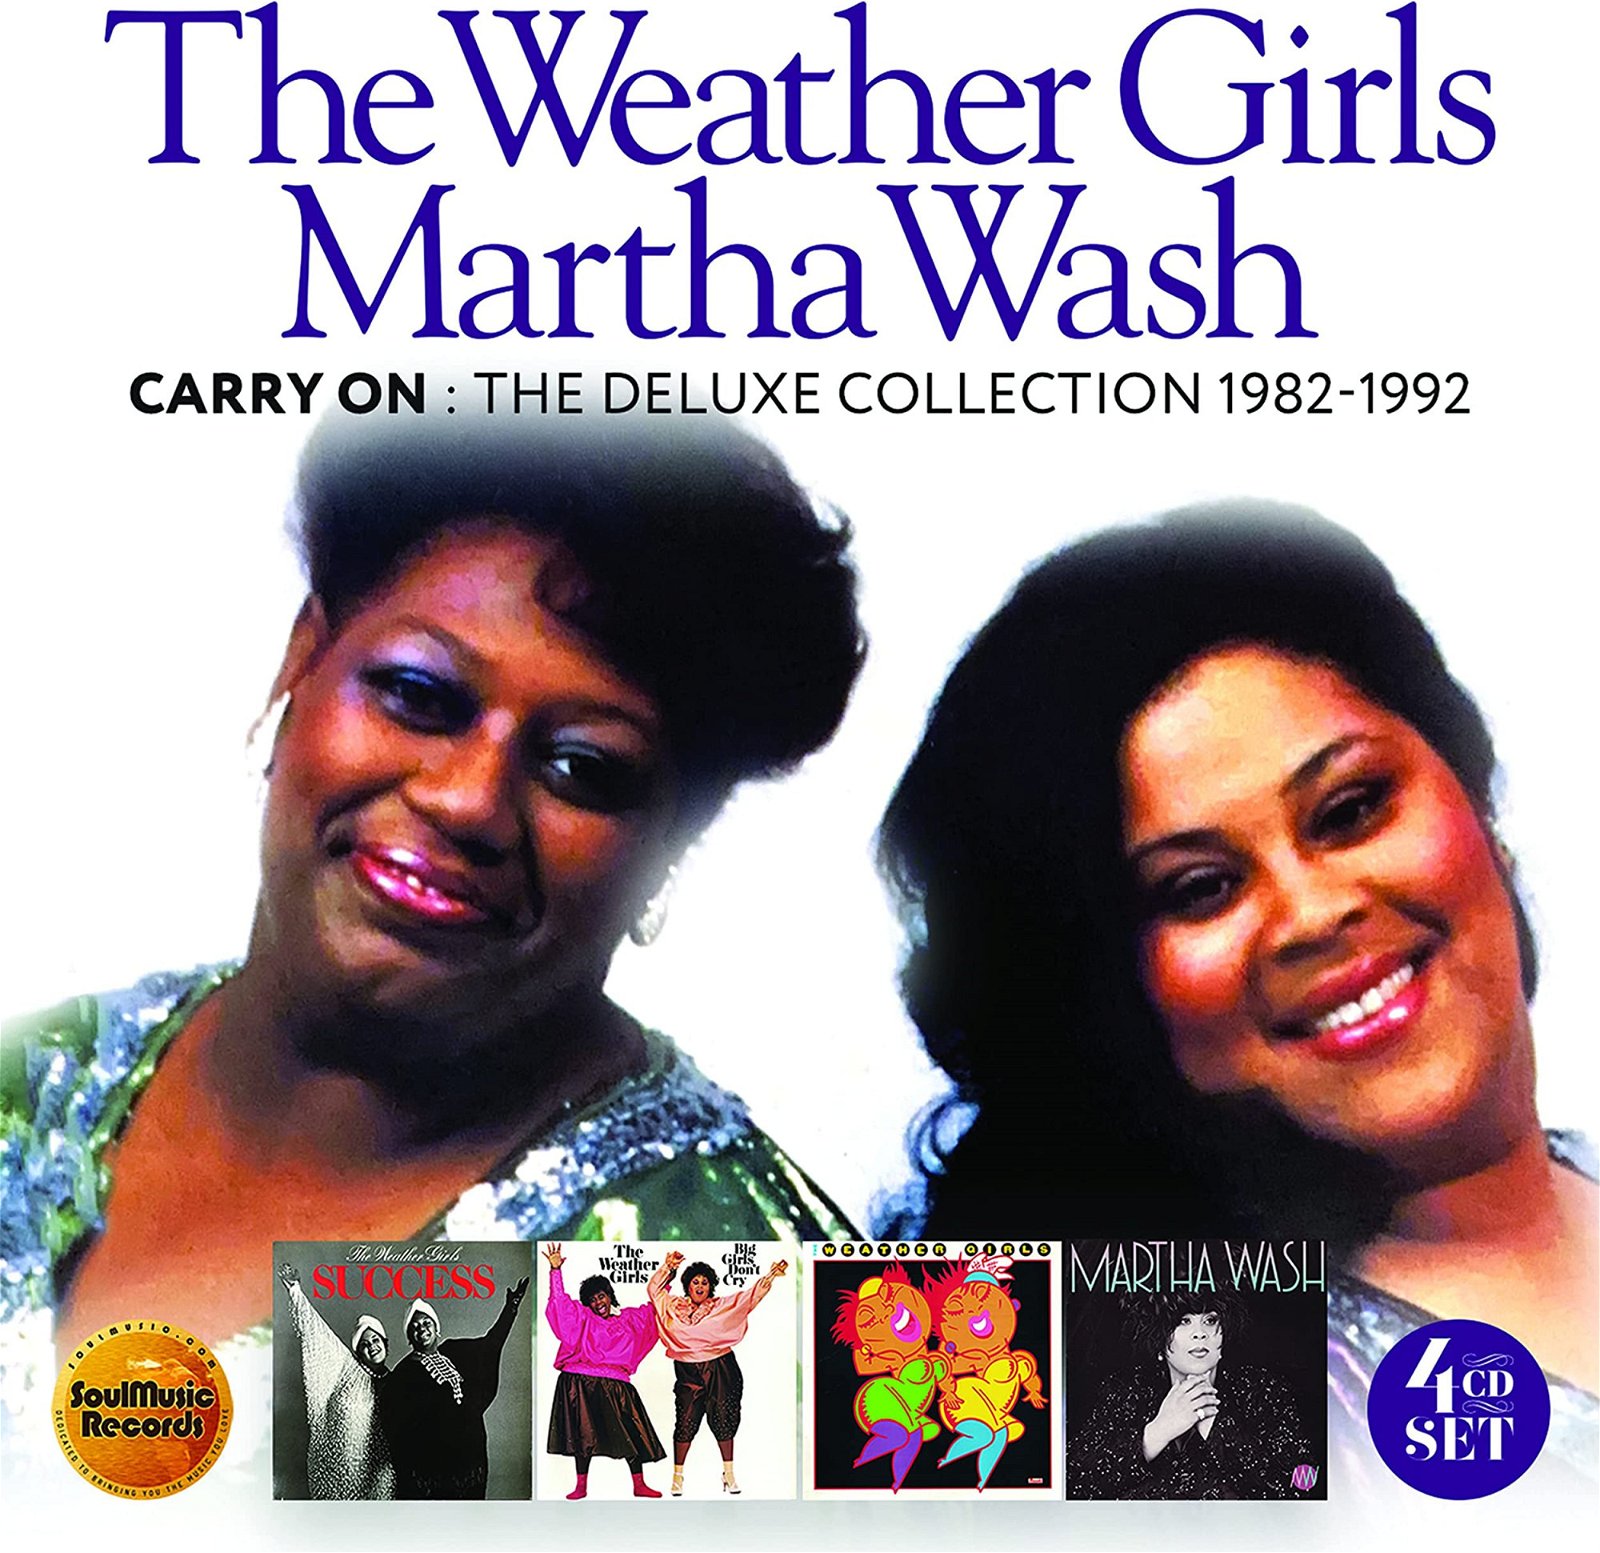 CD Shop - WEATHER GIRLS/MARTHA WASH CARRY ON: THE DELUXE EDITION 1982-1992